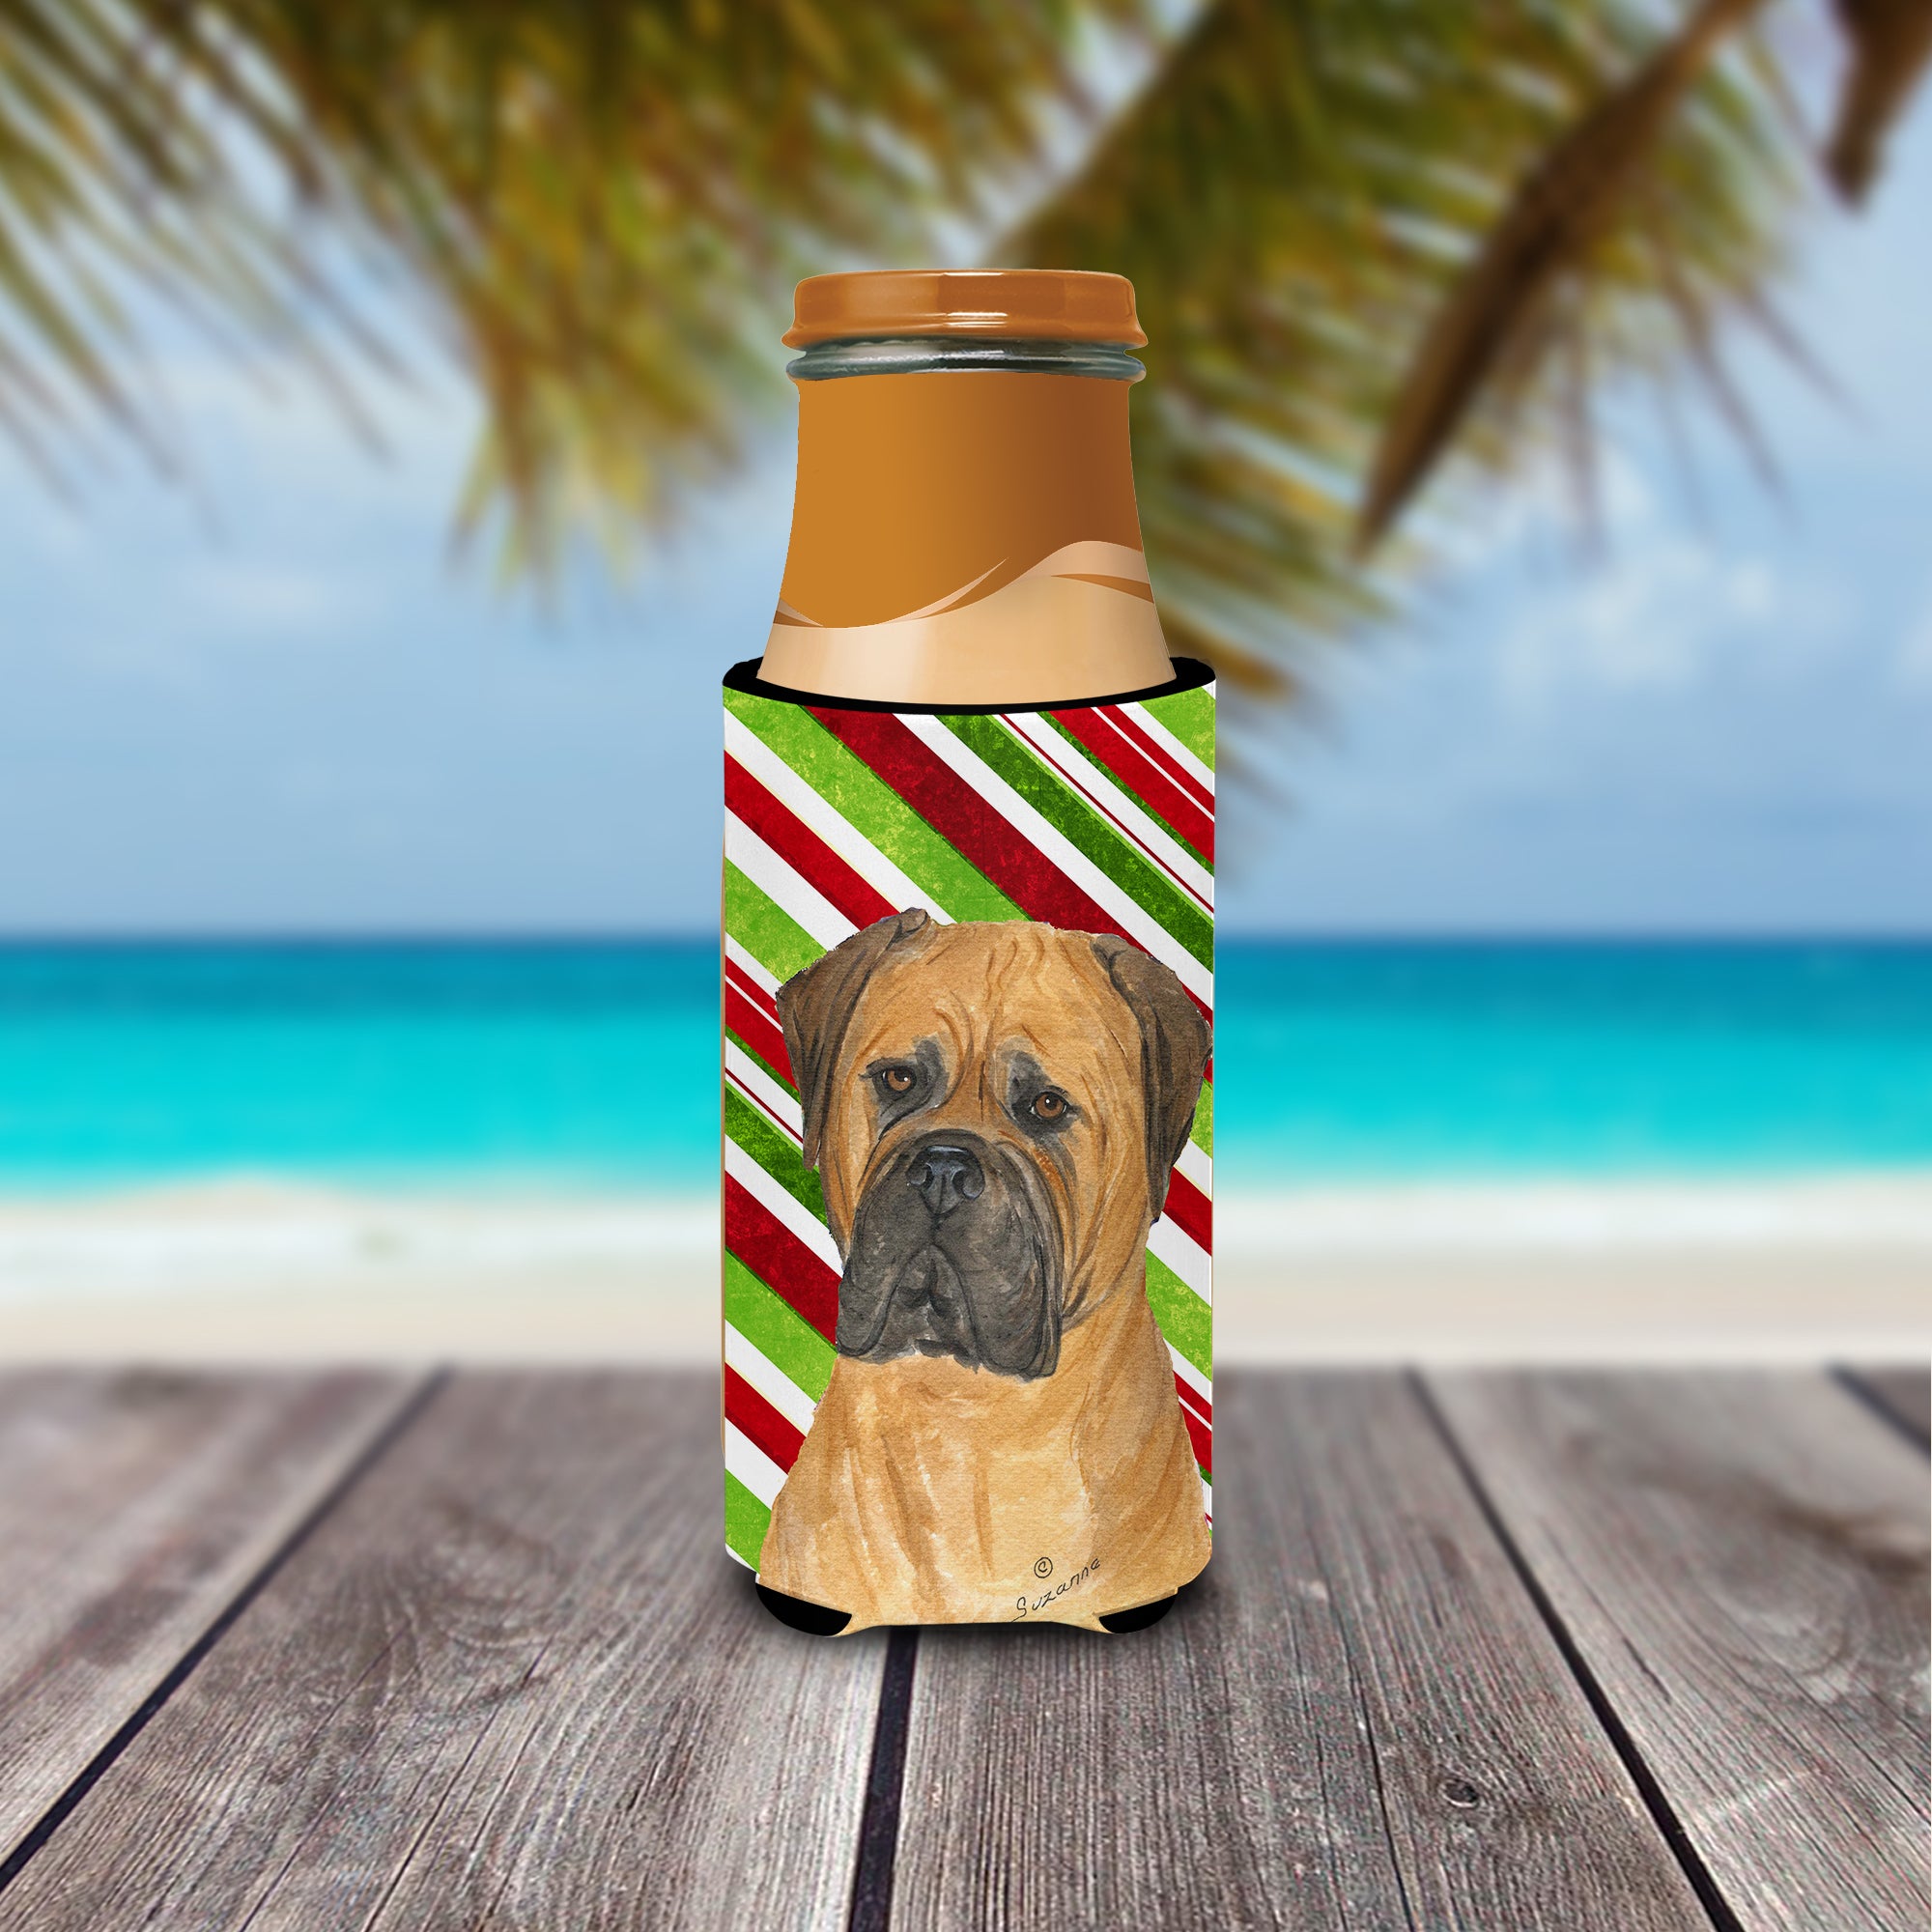 Bullmastiff Candy Cane Holiday Christmas Ultra Beverage Insulators for slim cans SS4586MUK